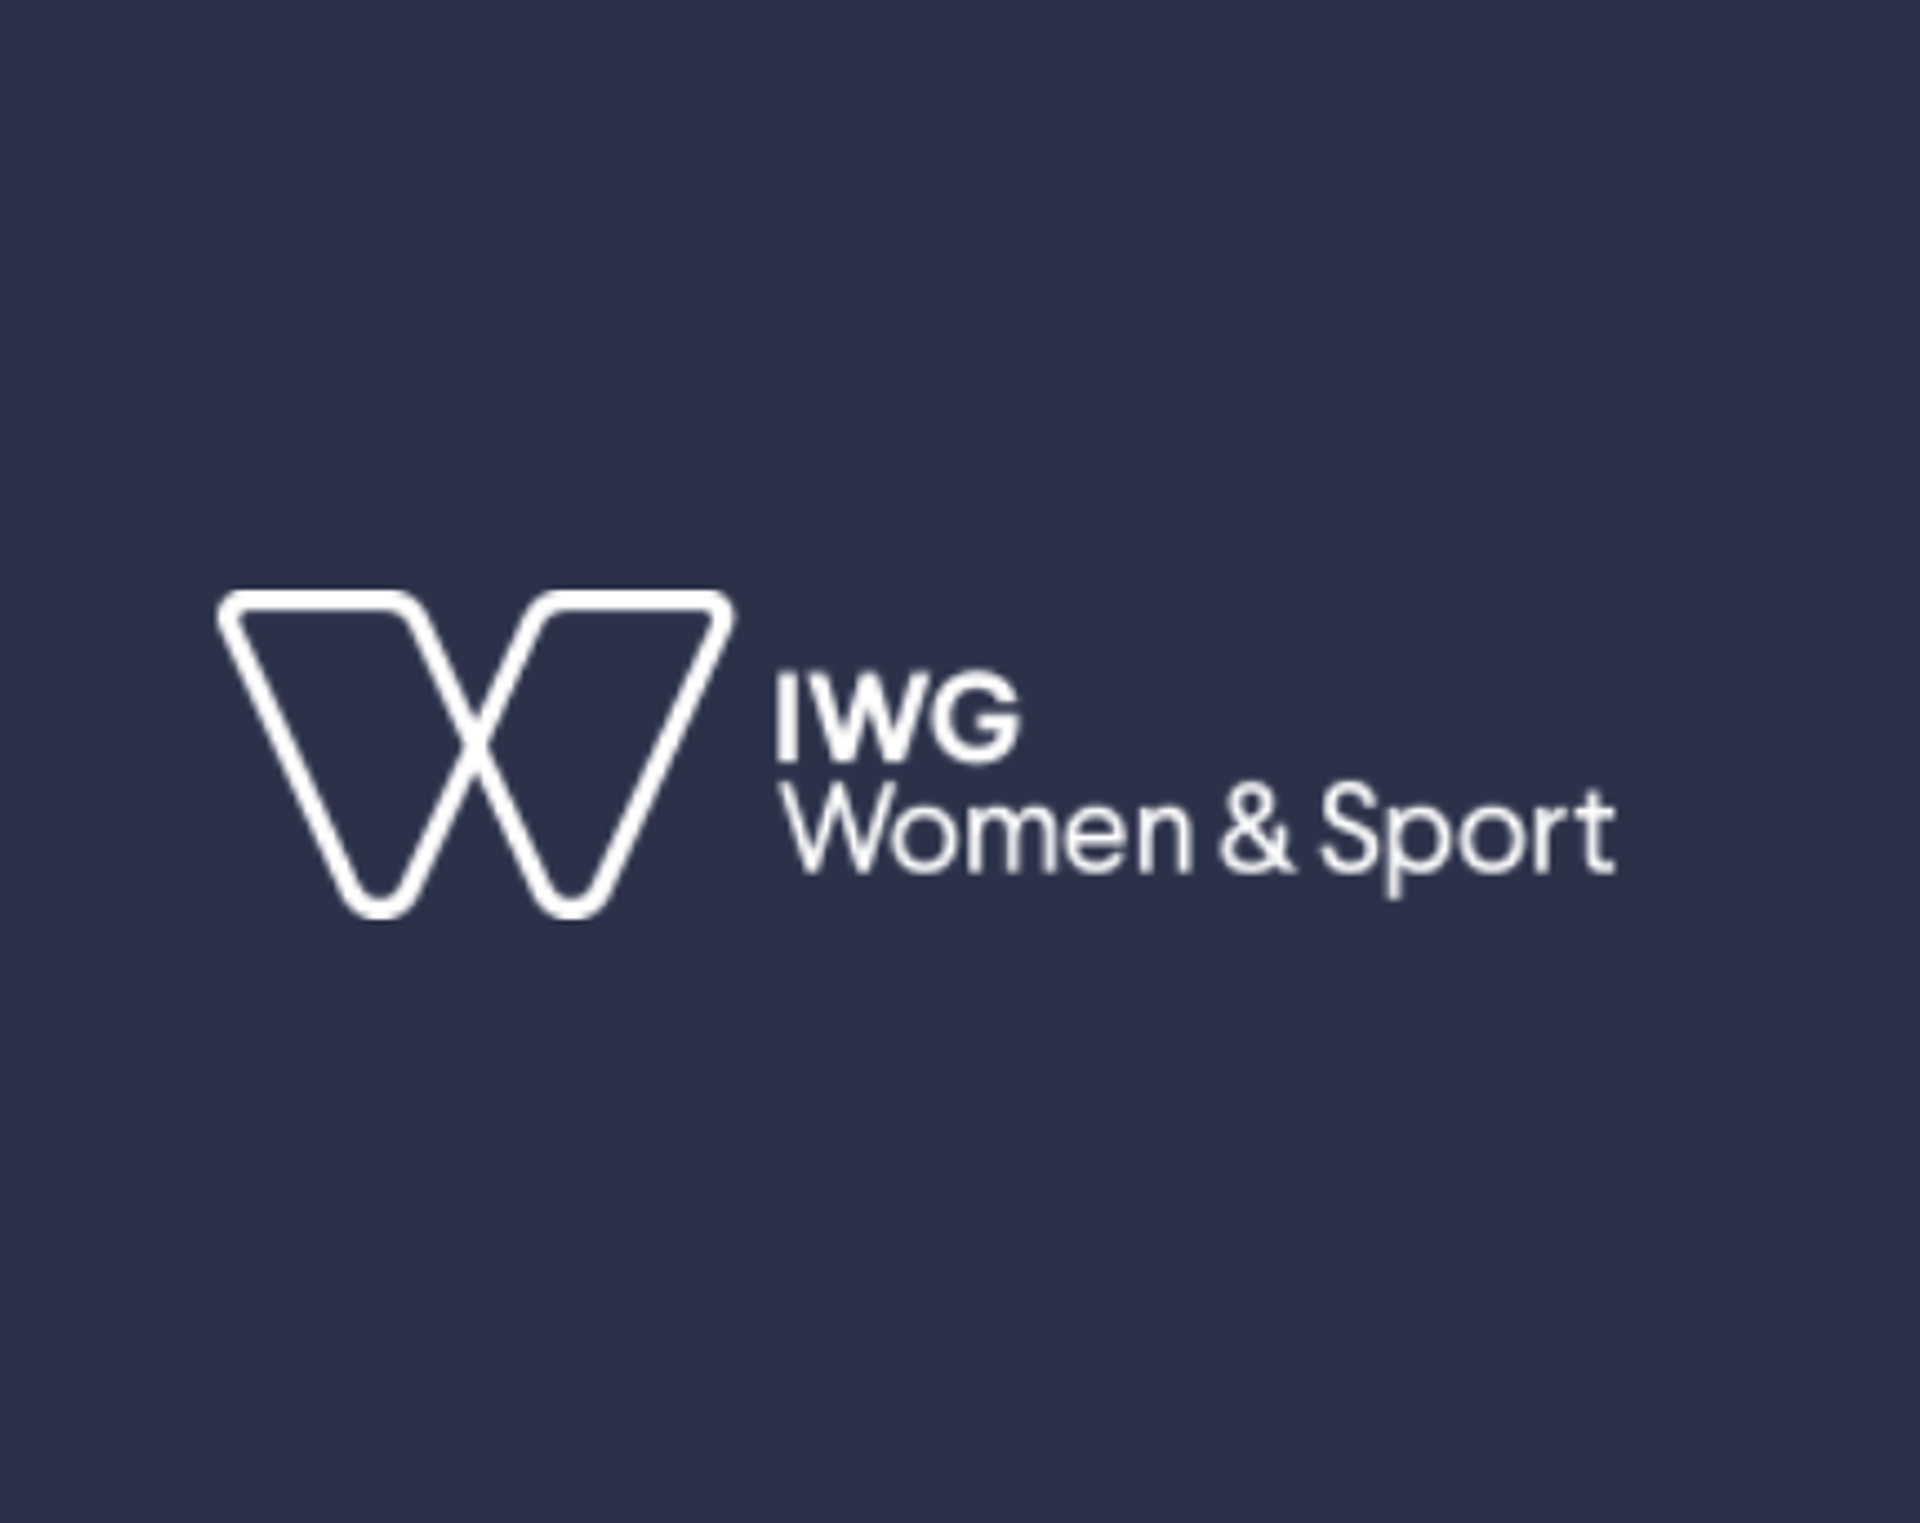 WCA to be presented at the 8th IWG World Conference on Women & Sport